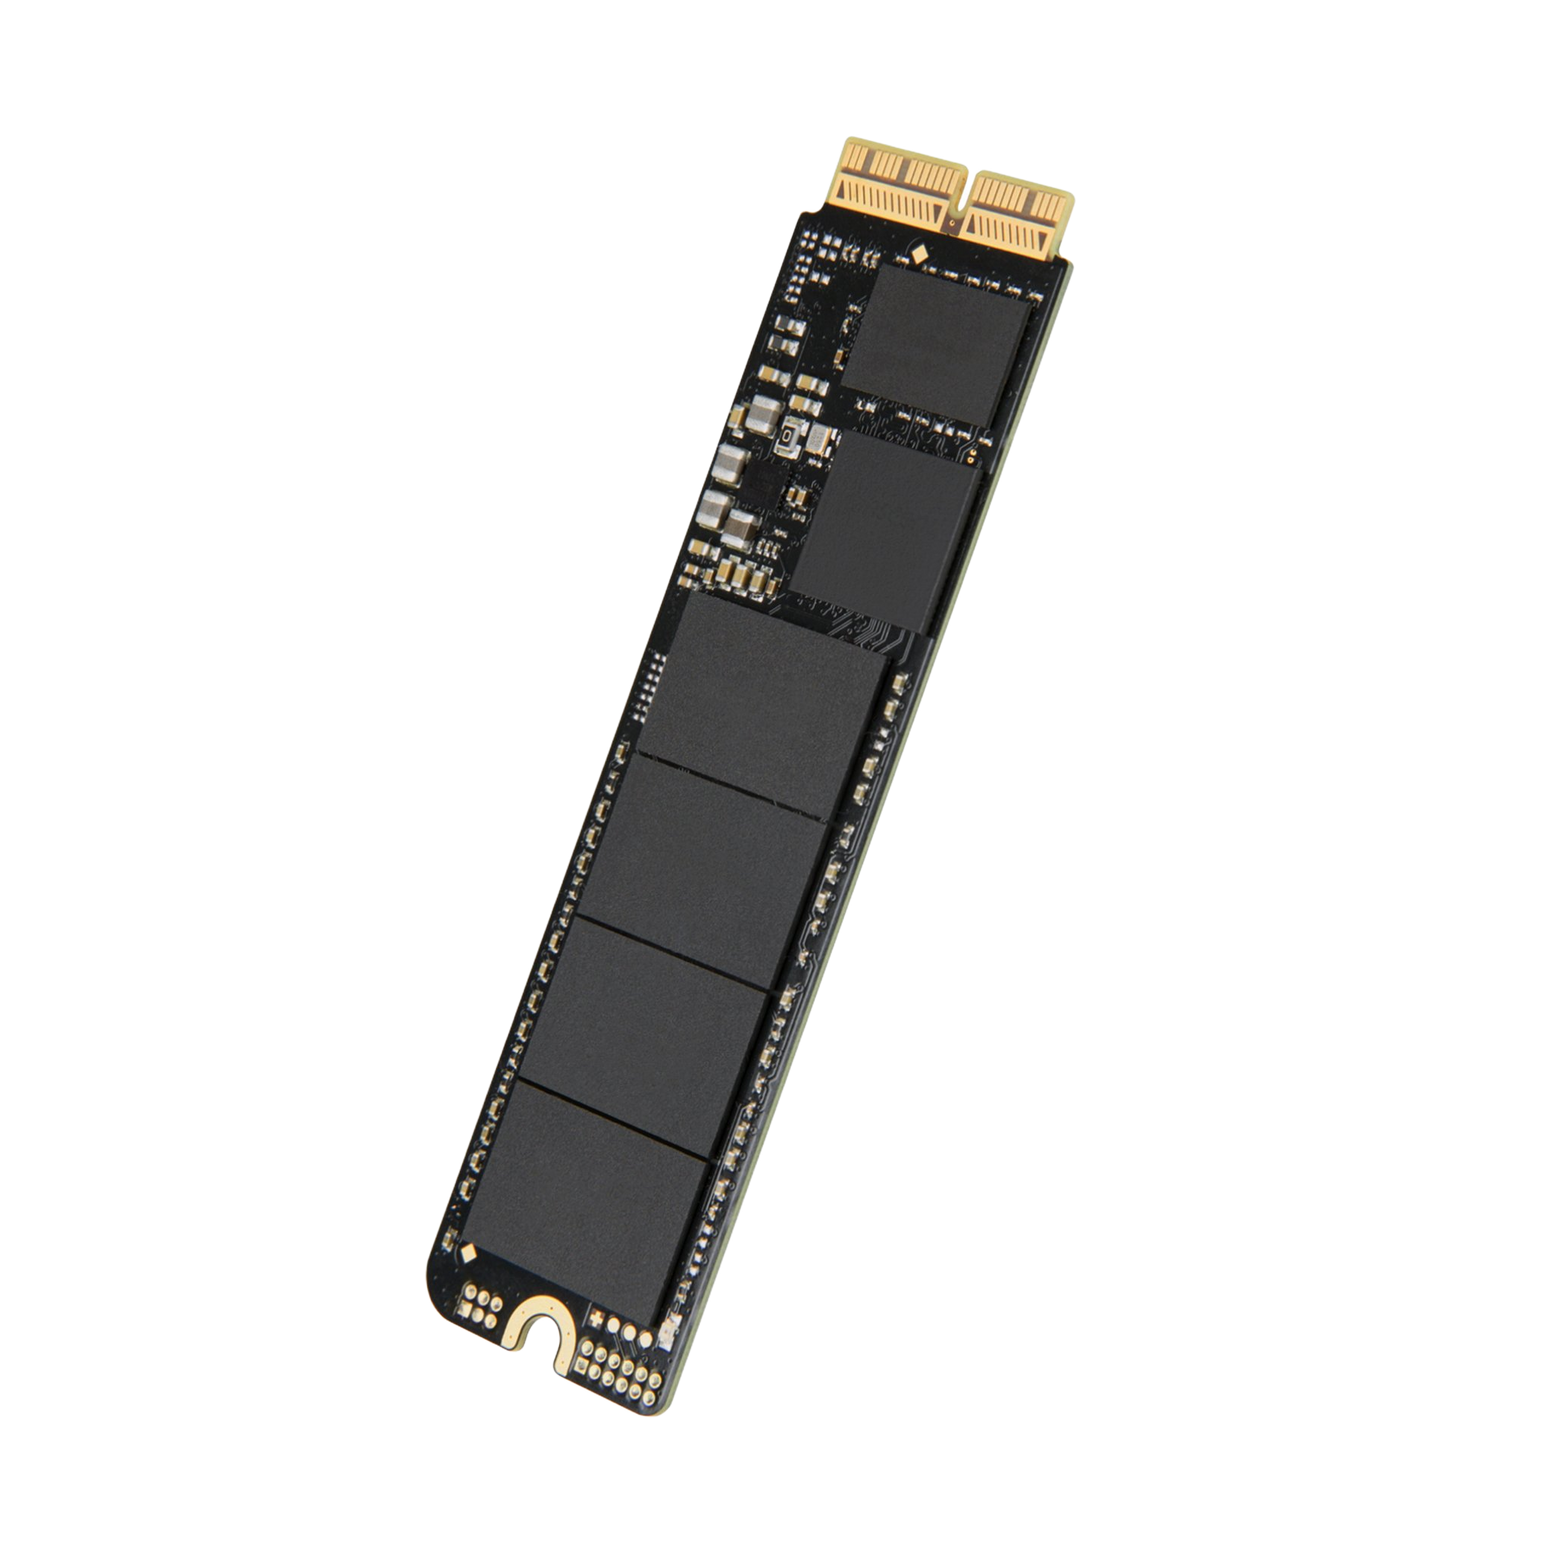 Transcend 480GB Jet Drive 820 SSD Only for MacBook Pro (Late 2013 - Early 2015), MacBook Air (Mid 2013 - Early 2015), Mac mini (Late 2014), Mac Pro (Late 2013) - AHCI Gen3 x2